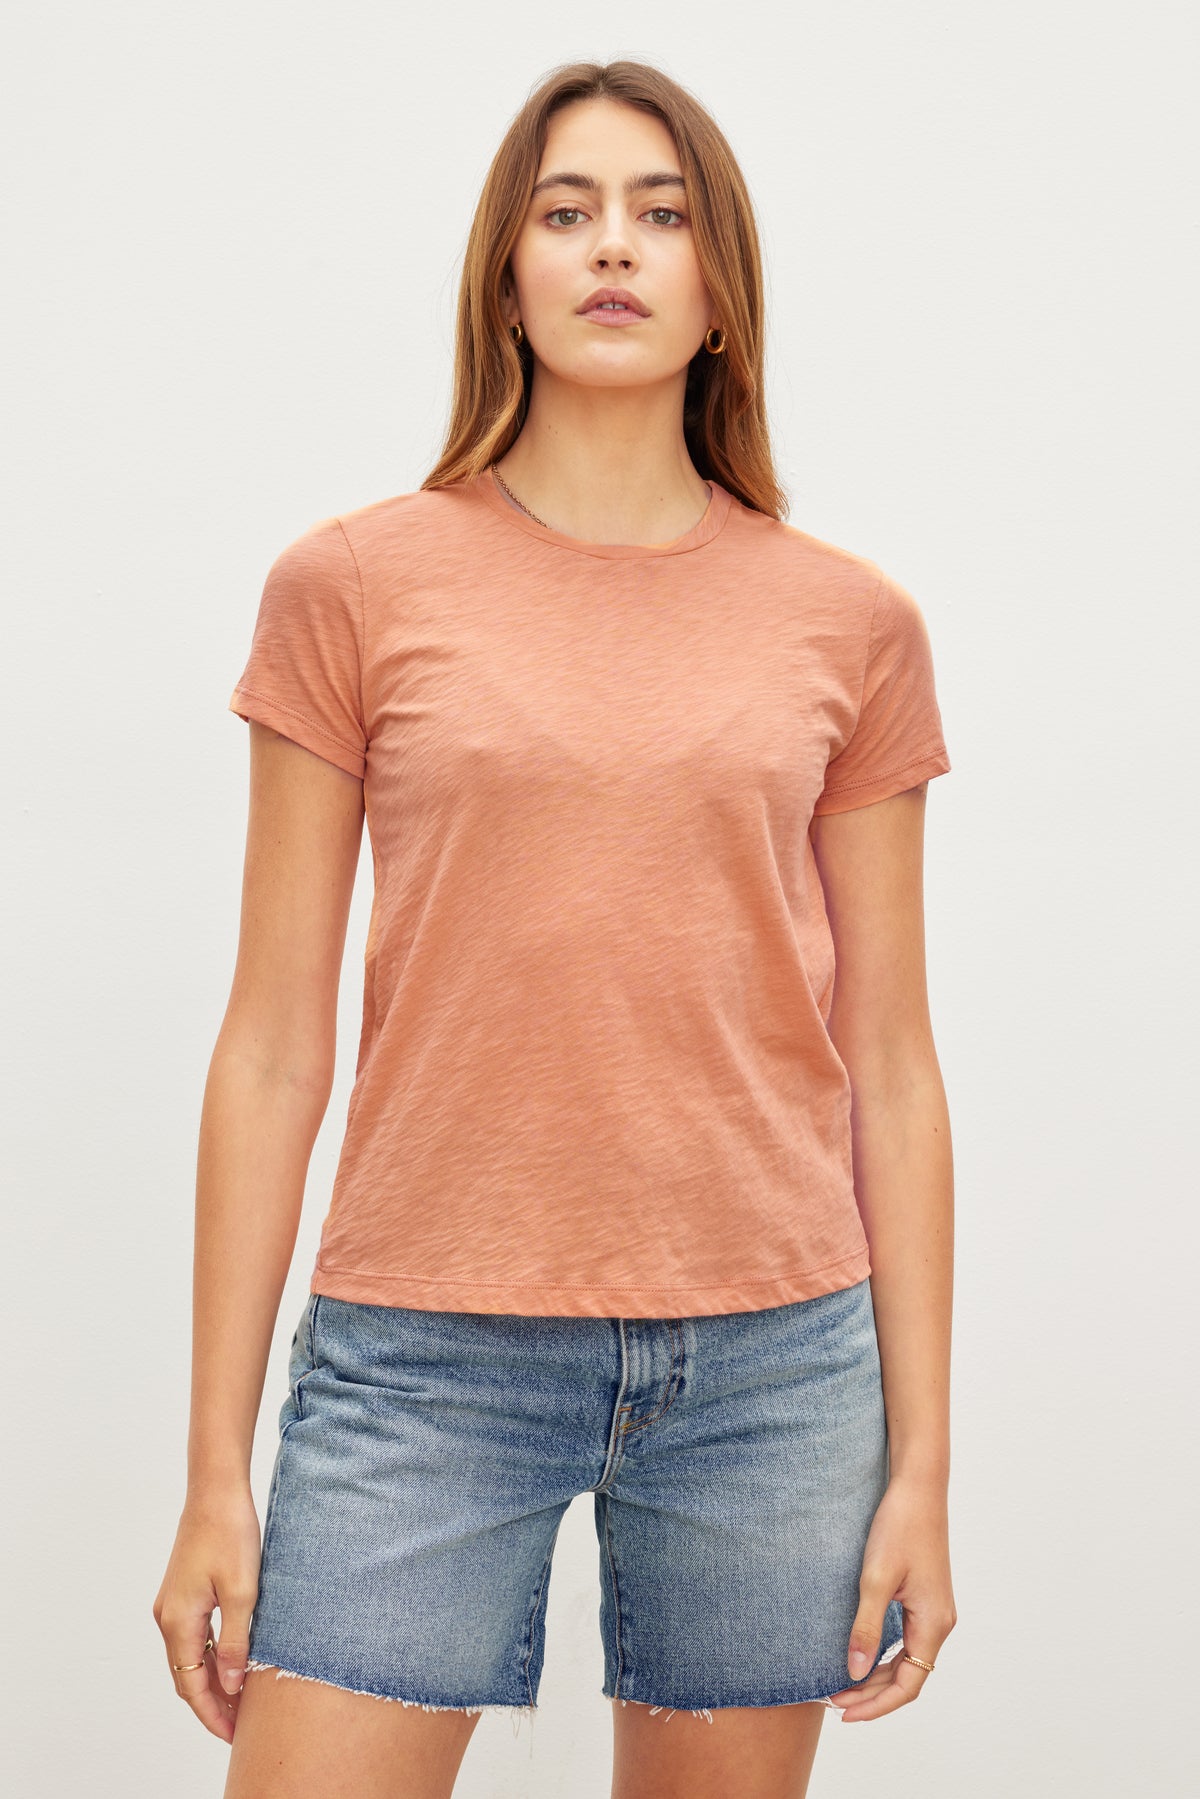 A woman in a retro vibe pink SIERRA CREW NECK TEE made from cotton slub, by Velvet by Graham & Spencer.-35982934868161